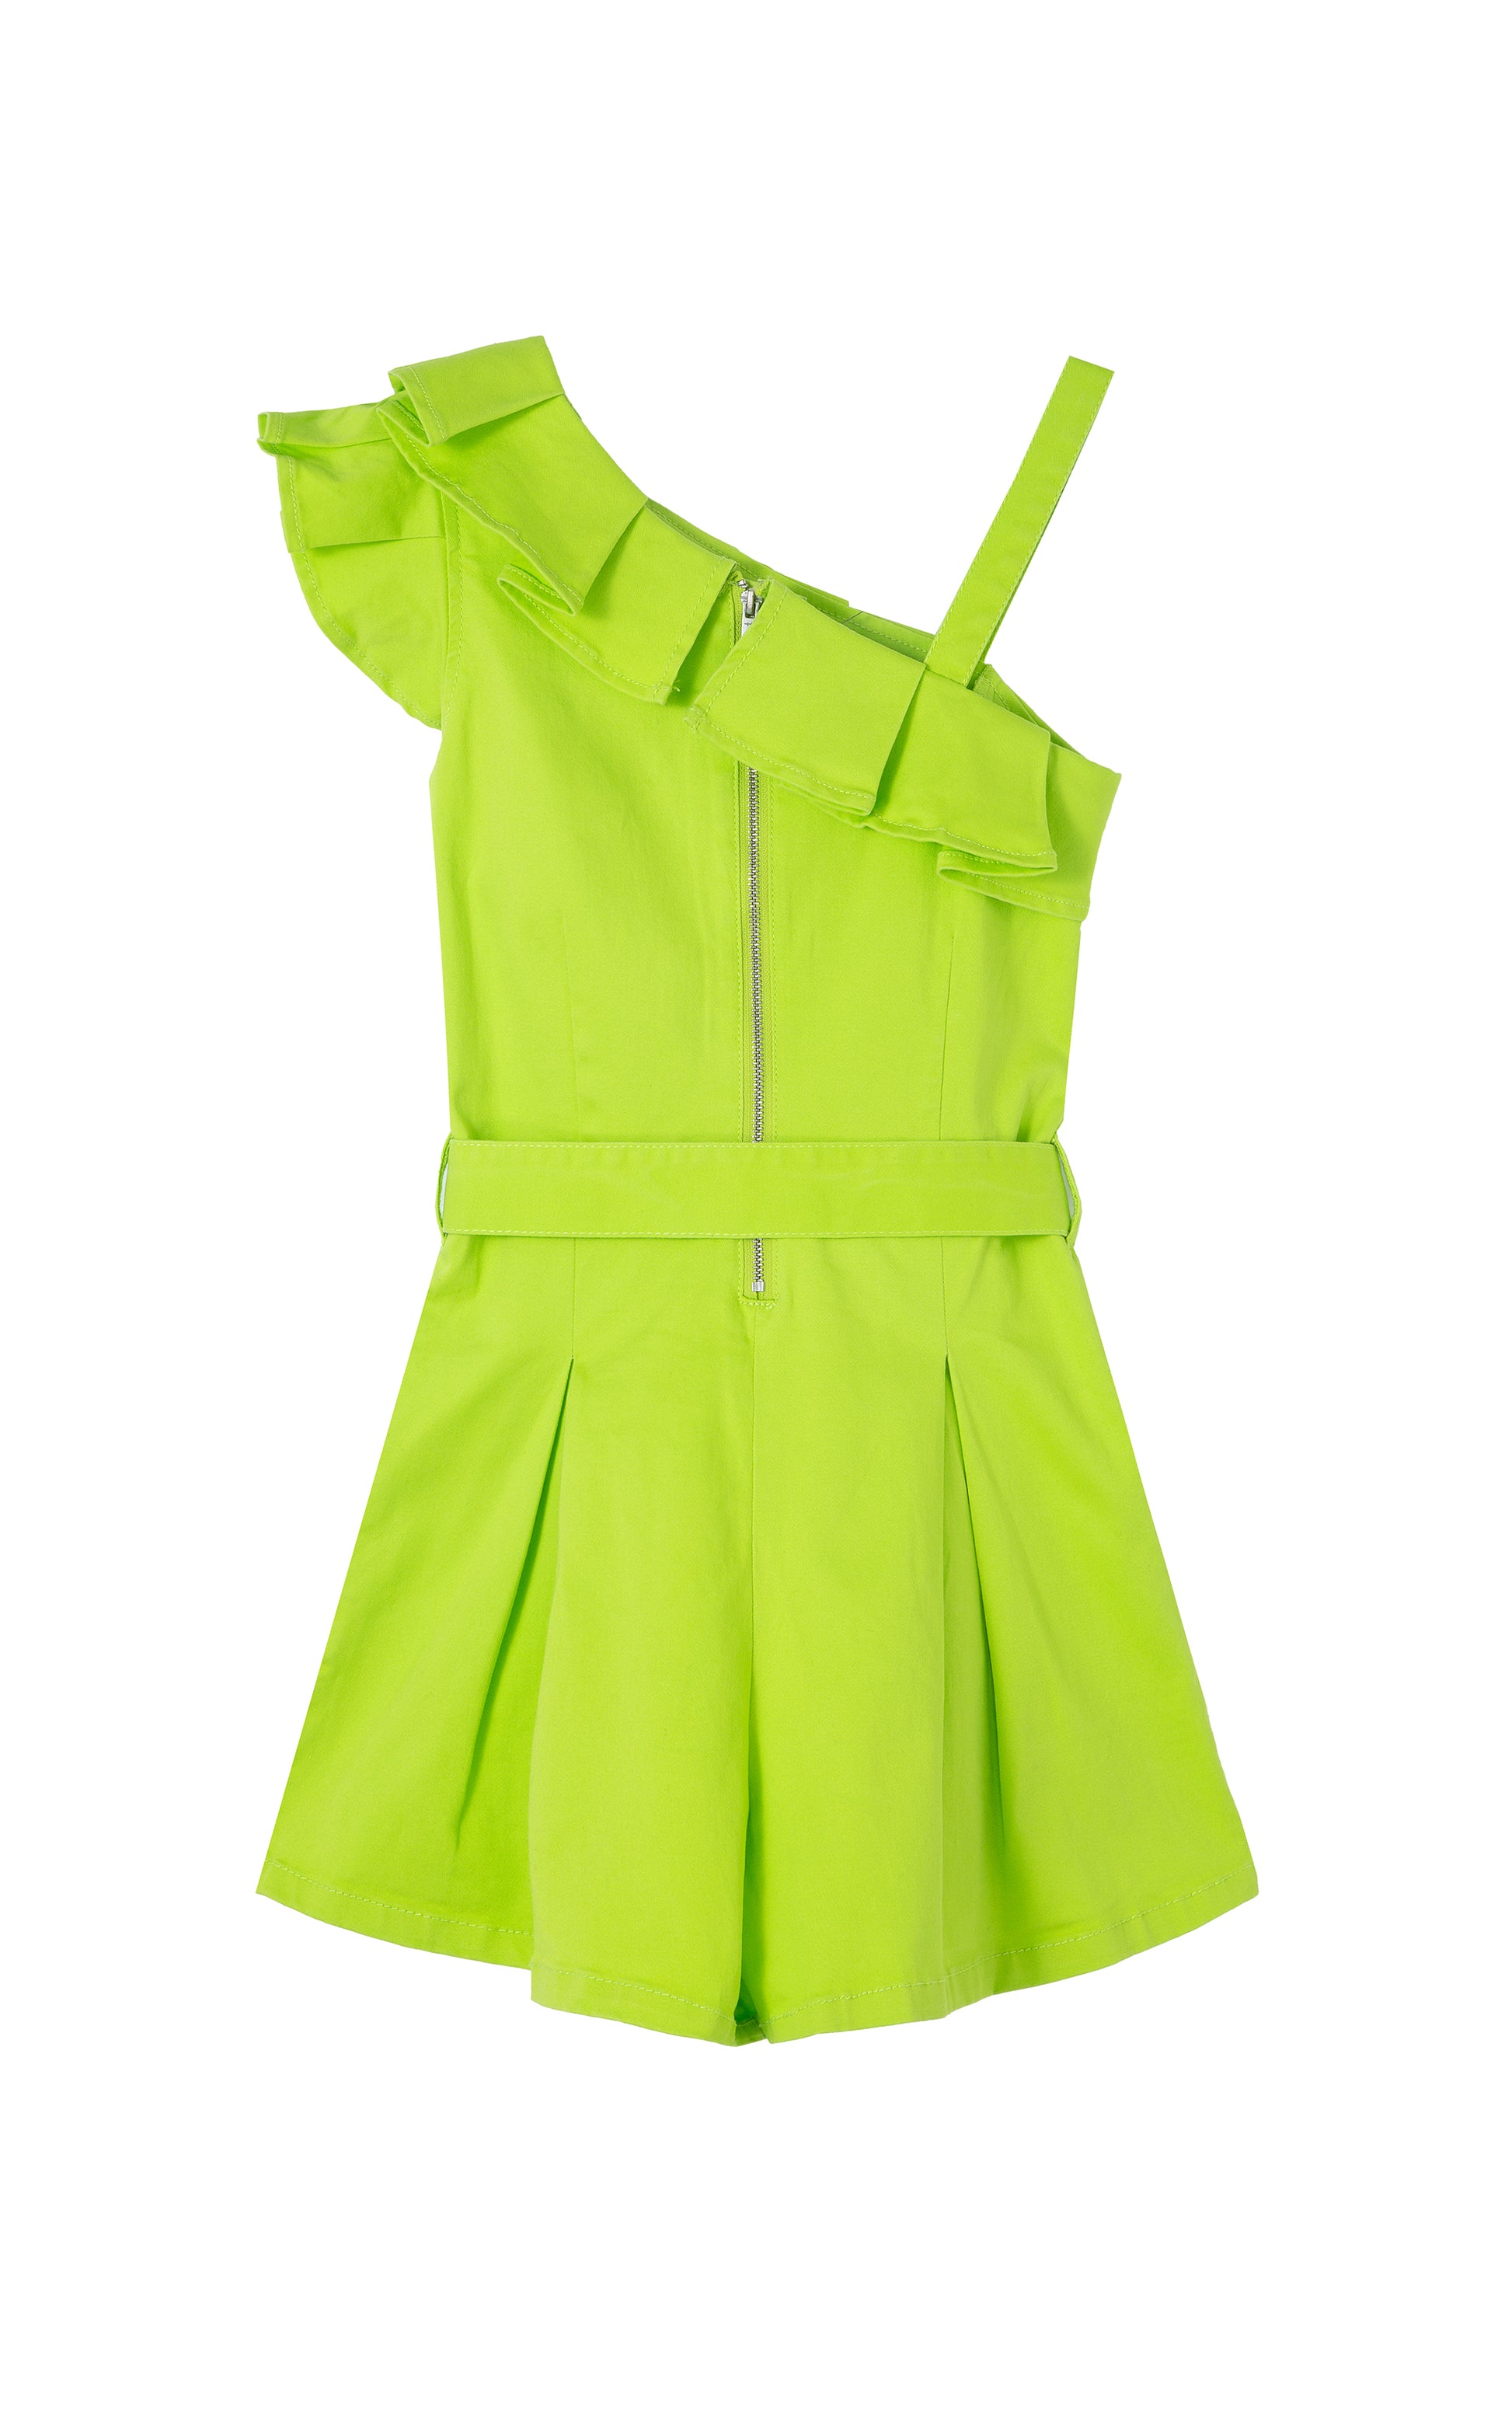 Back view of lime green one shoulder ruffle romper 